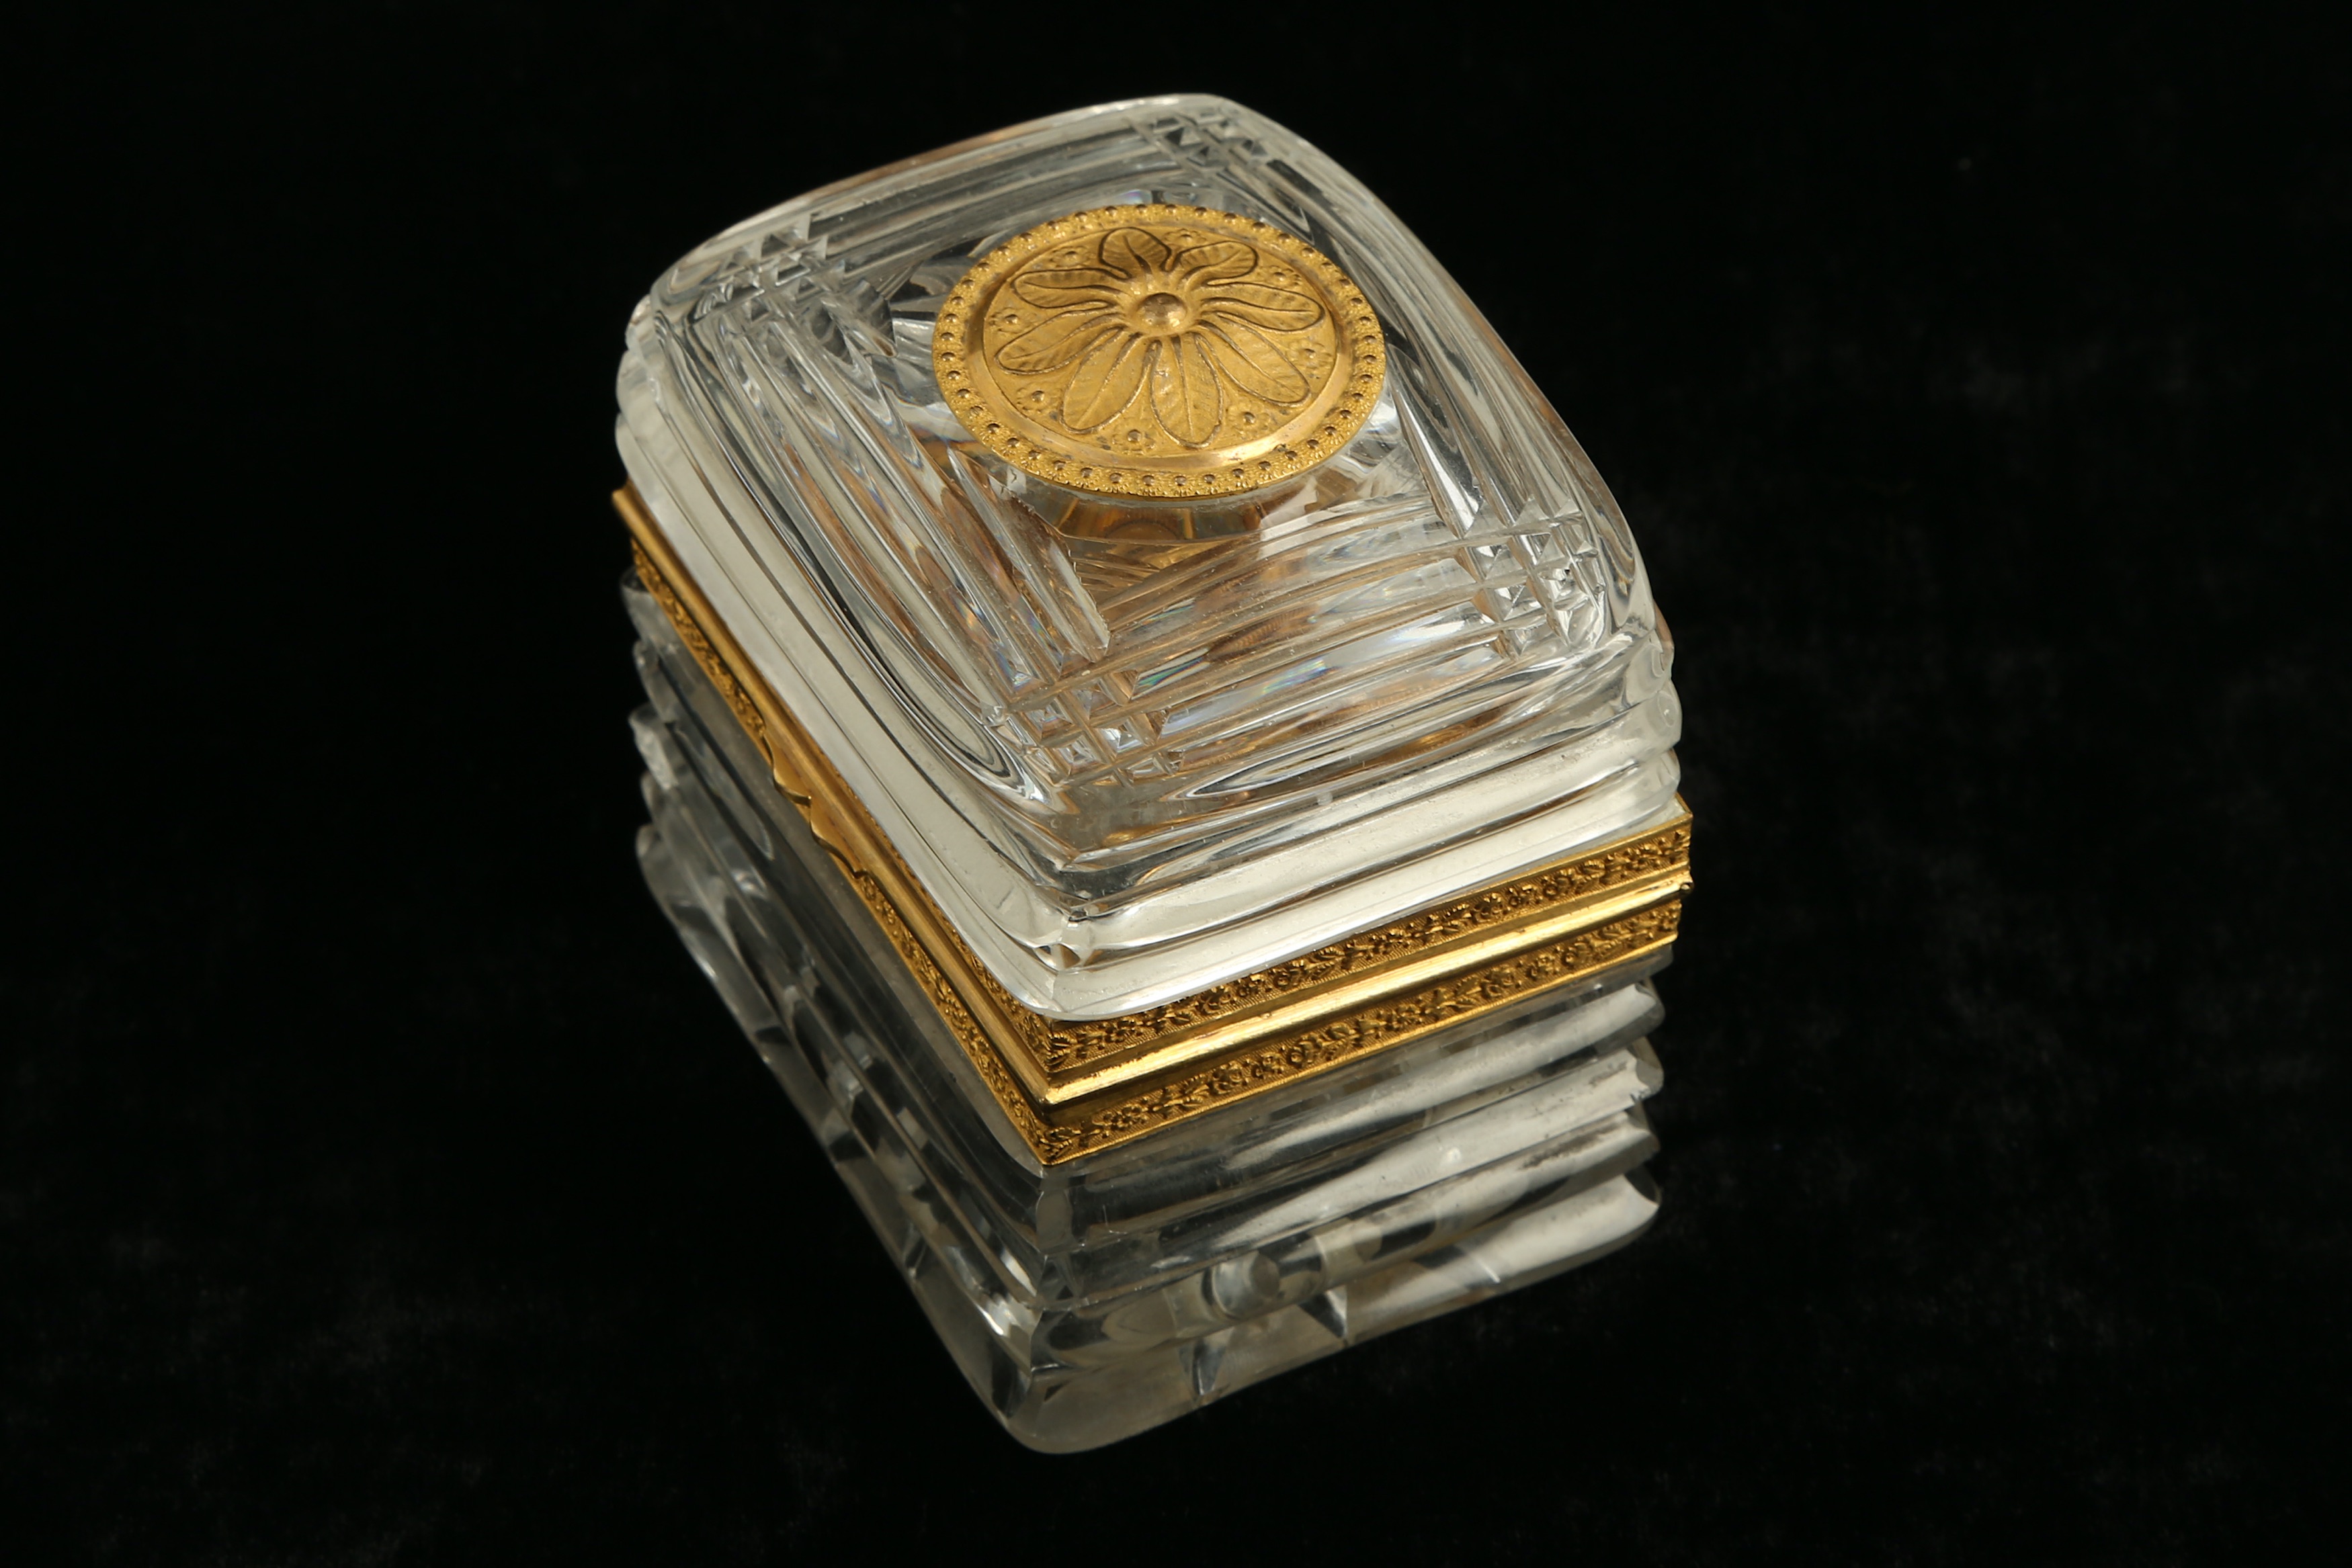 A 19th Century French Palais-Royal gilt bronze mounted glass perfume casket, circa 1830s, in the - Image 3 of 6